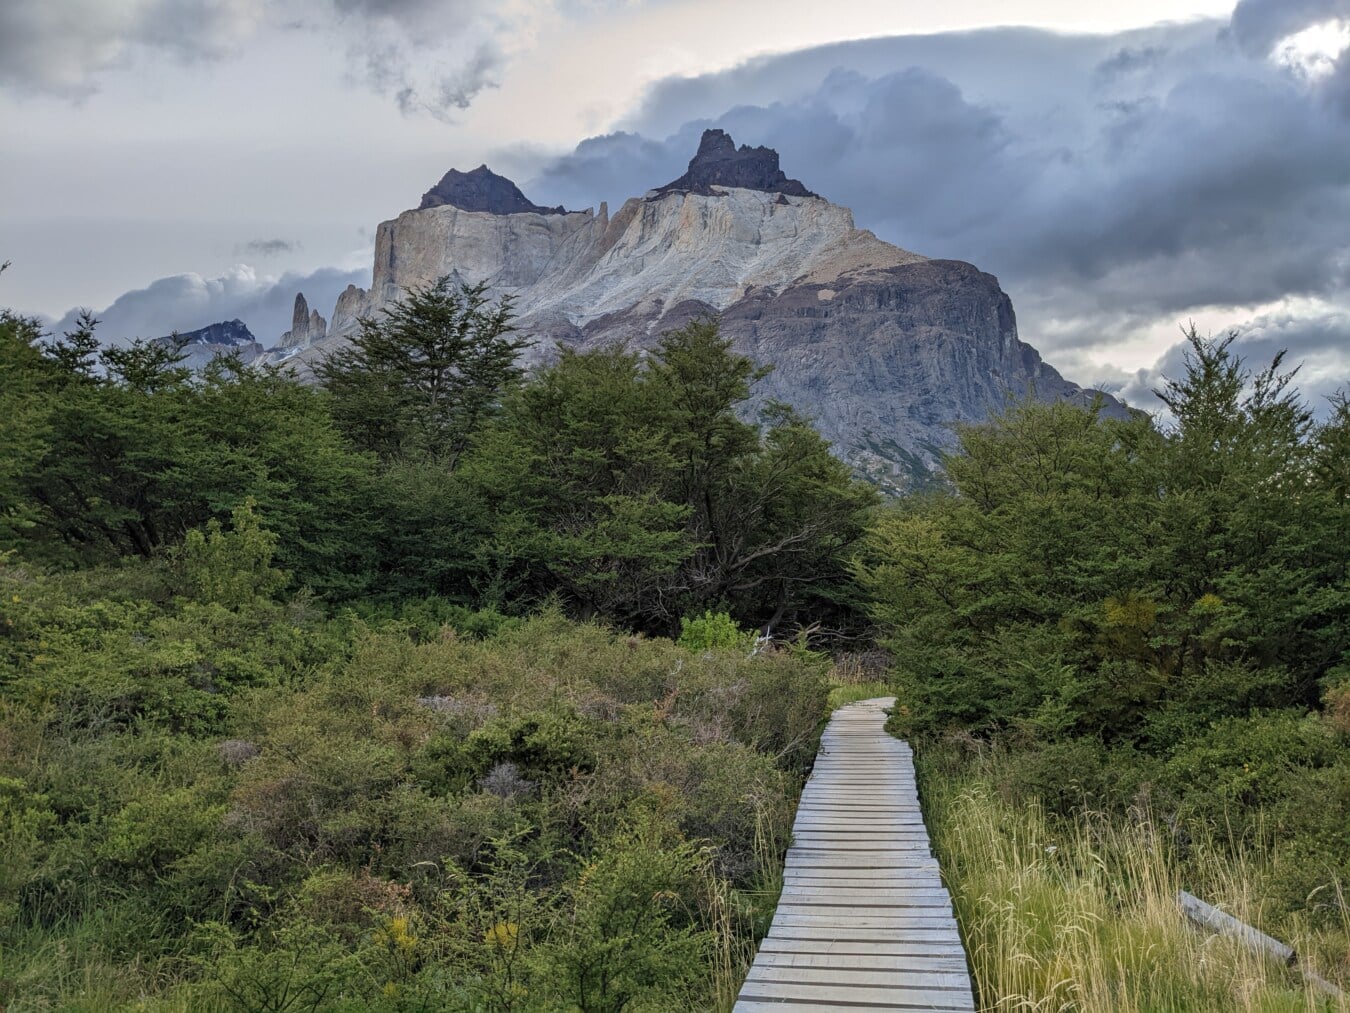 wooden, pathway, national park, wilderness, trail, mountains, landscape, mountain, nature, outdoors